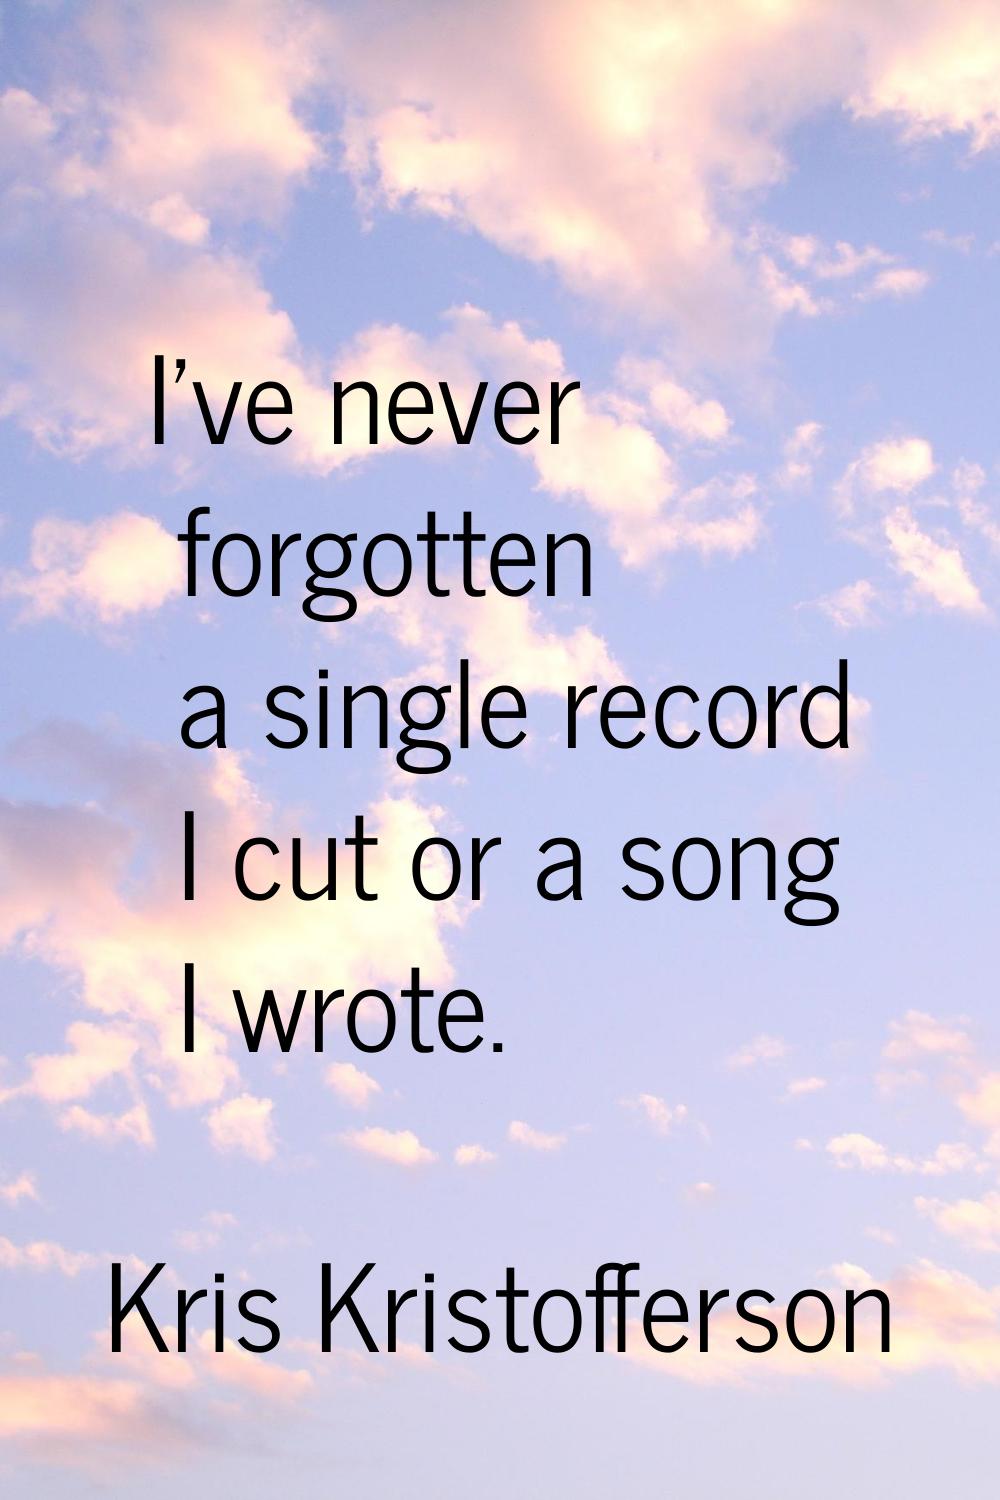 I've never forgotten a single record I cut or a song I wrote.